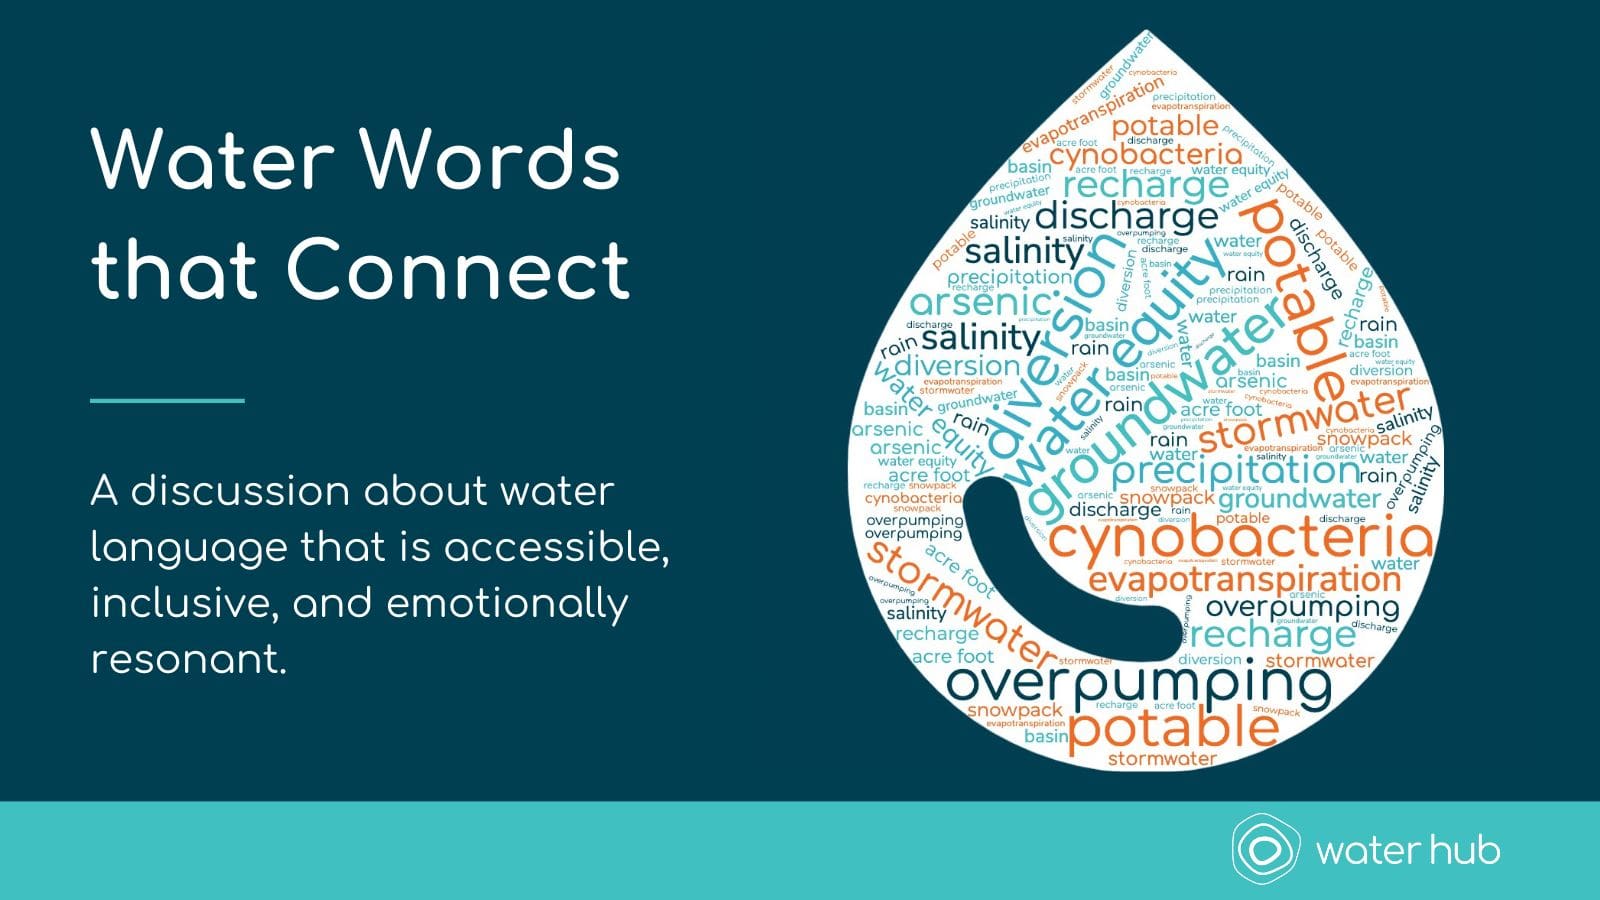 Water words that connect: A discussion about water language that is accessible, inclusive, and emotionally resonant.